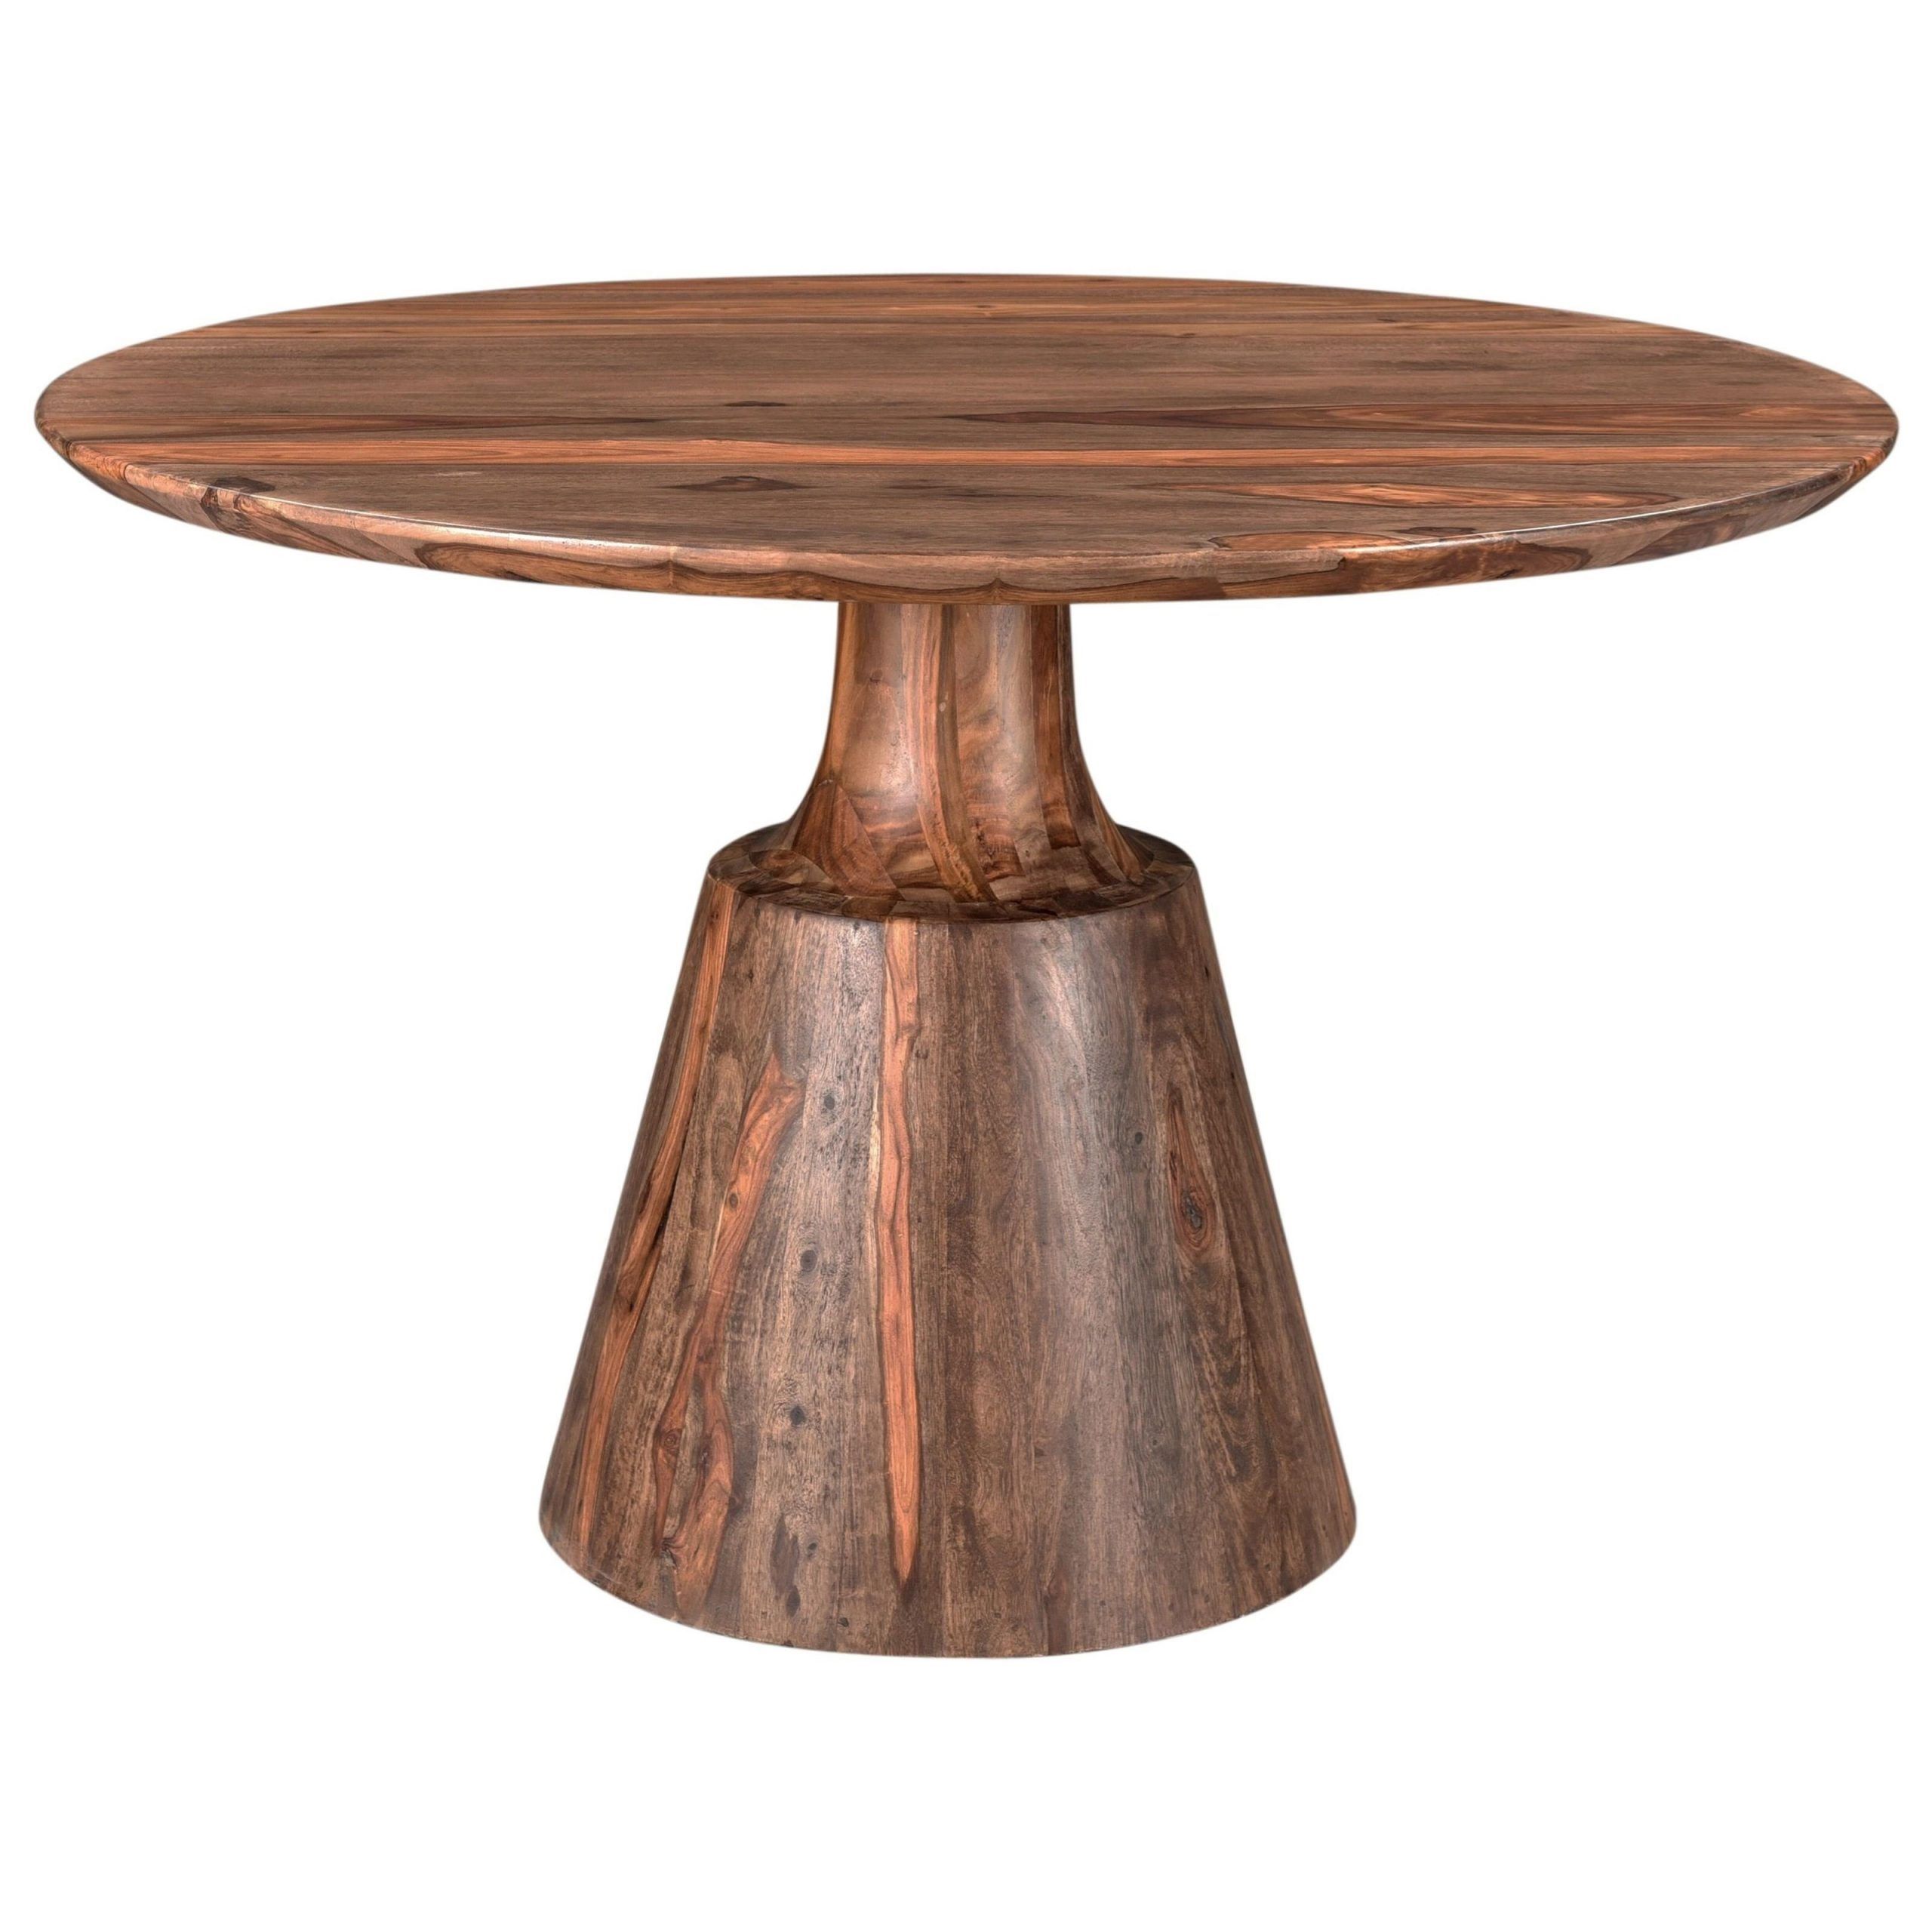 Brownstone Round Dining Table Pertaining To 2017 Johnson Round Pedestal Dining Tables (View 9 of 25)